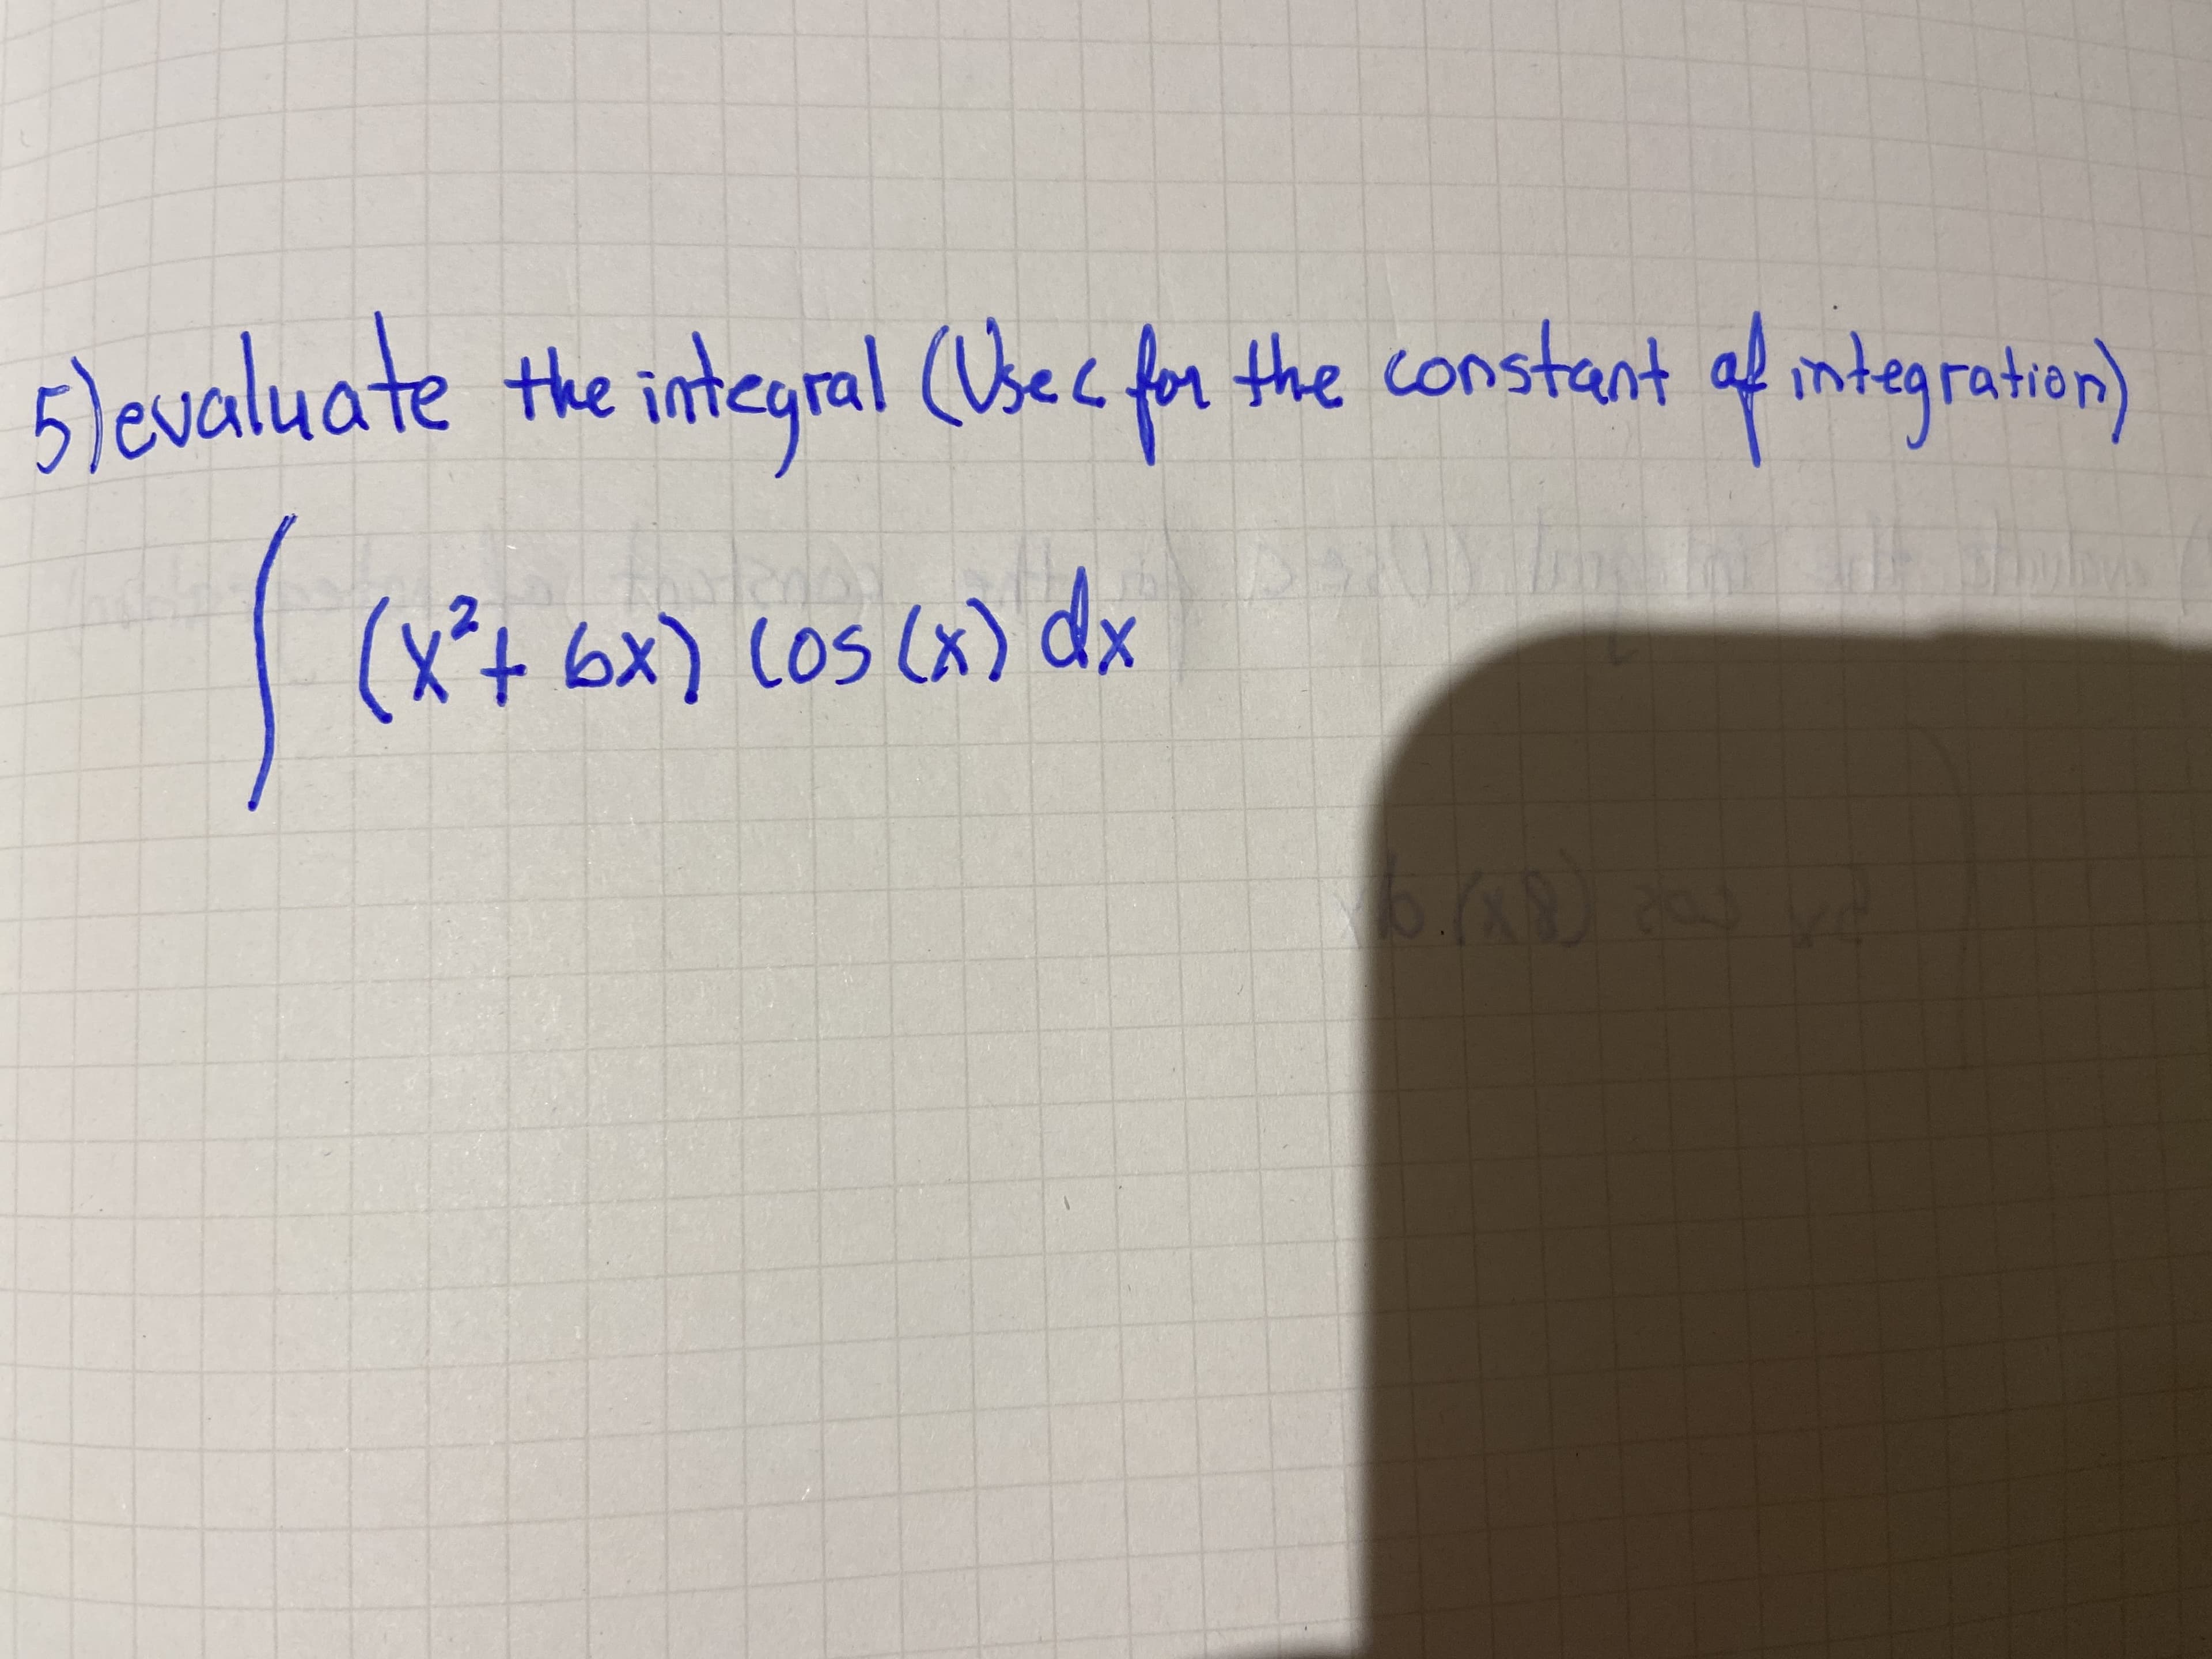 evaluate the integral (Usec for the constant af mtegration)
(Xt 6x) cos (x) dx
